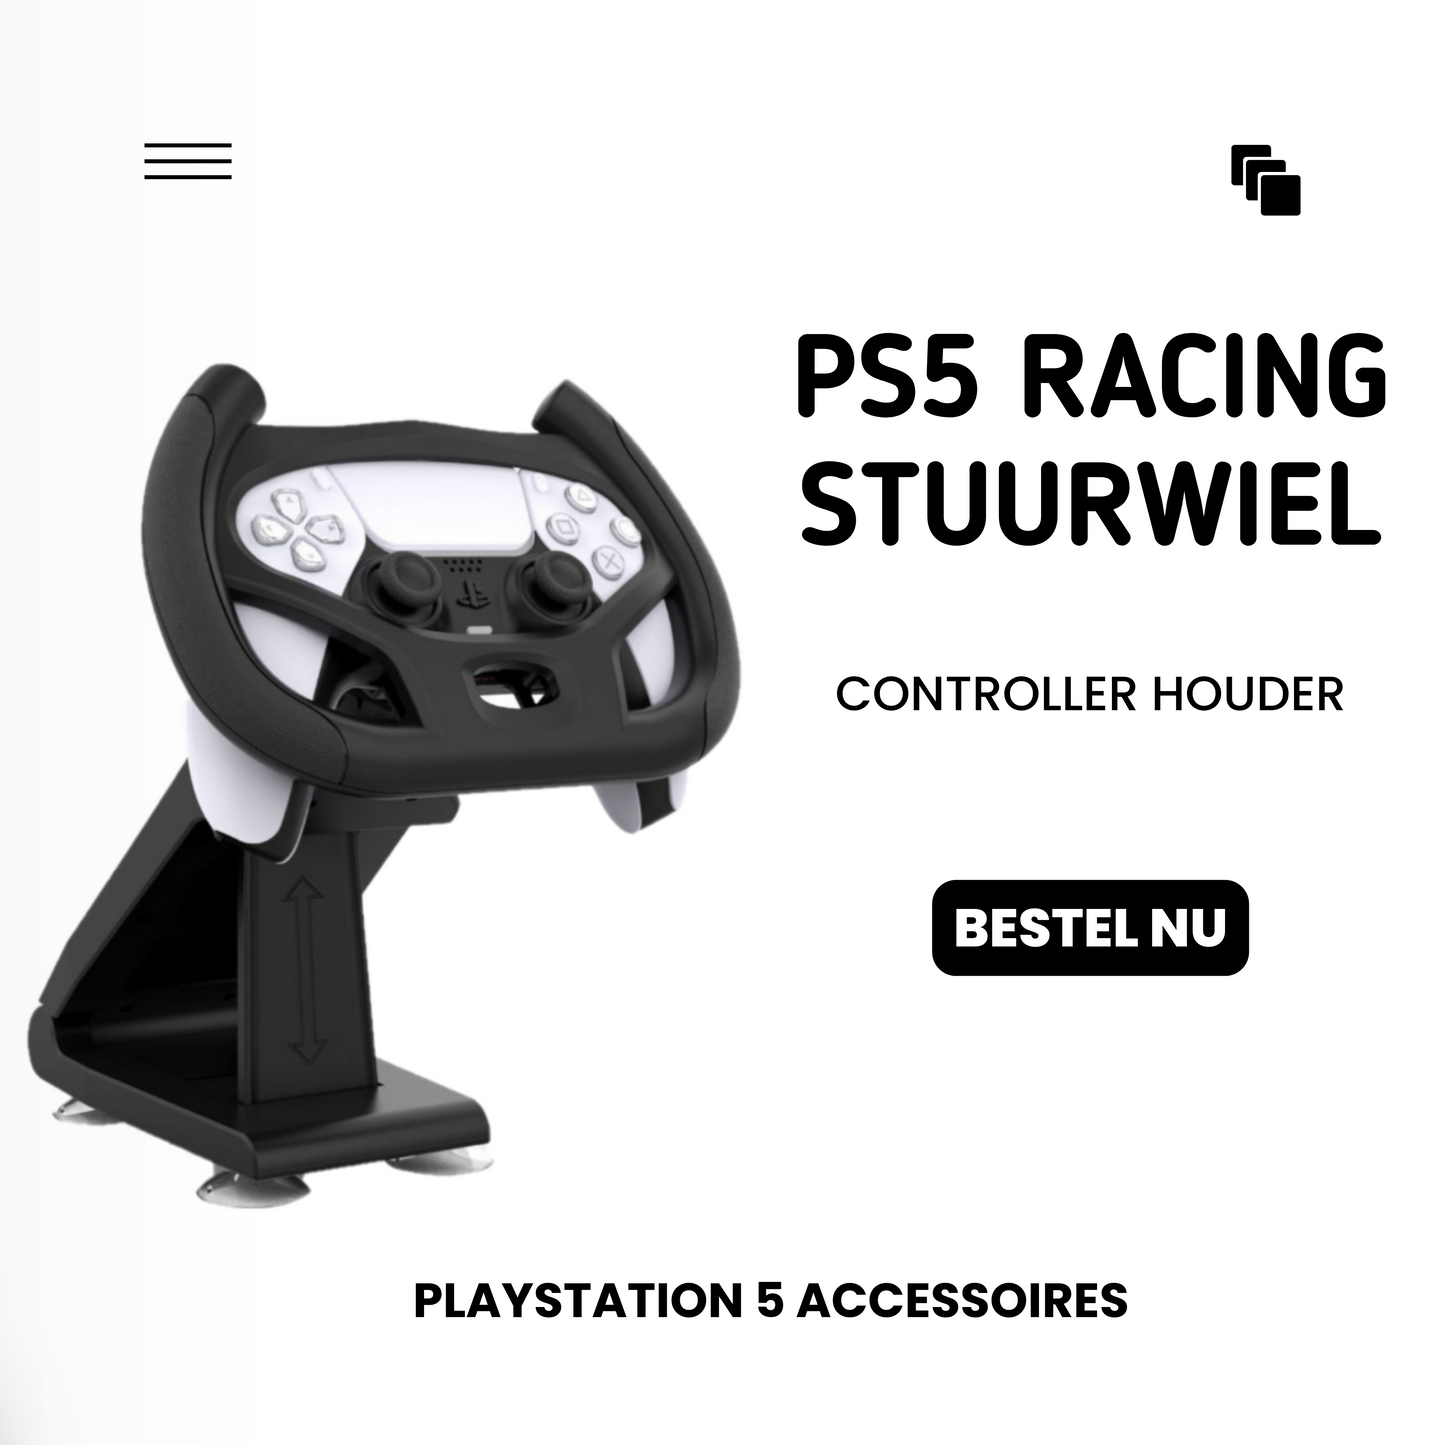      MOLOO-PS5-Racing-Stuurwiel-Gaming-Controller-Houder-Station-Playstation-5-Accessoires